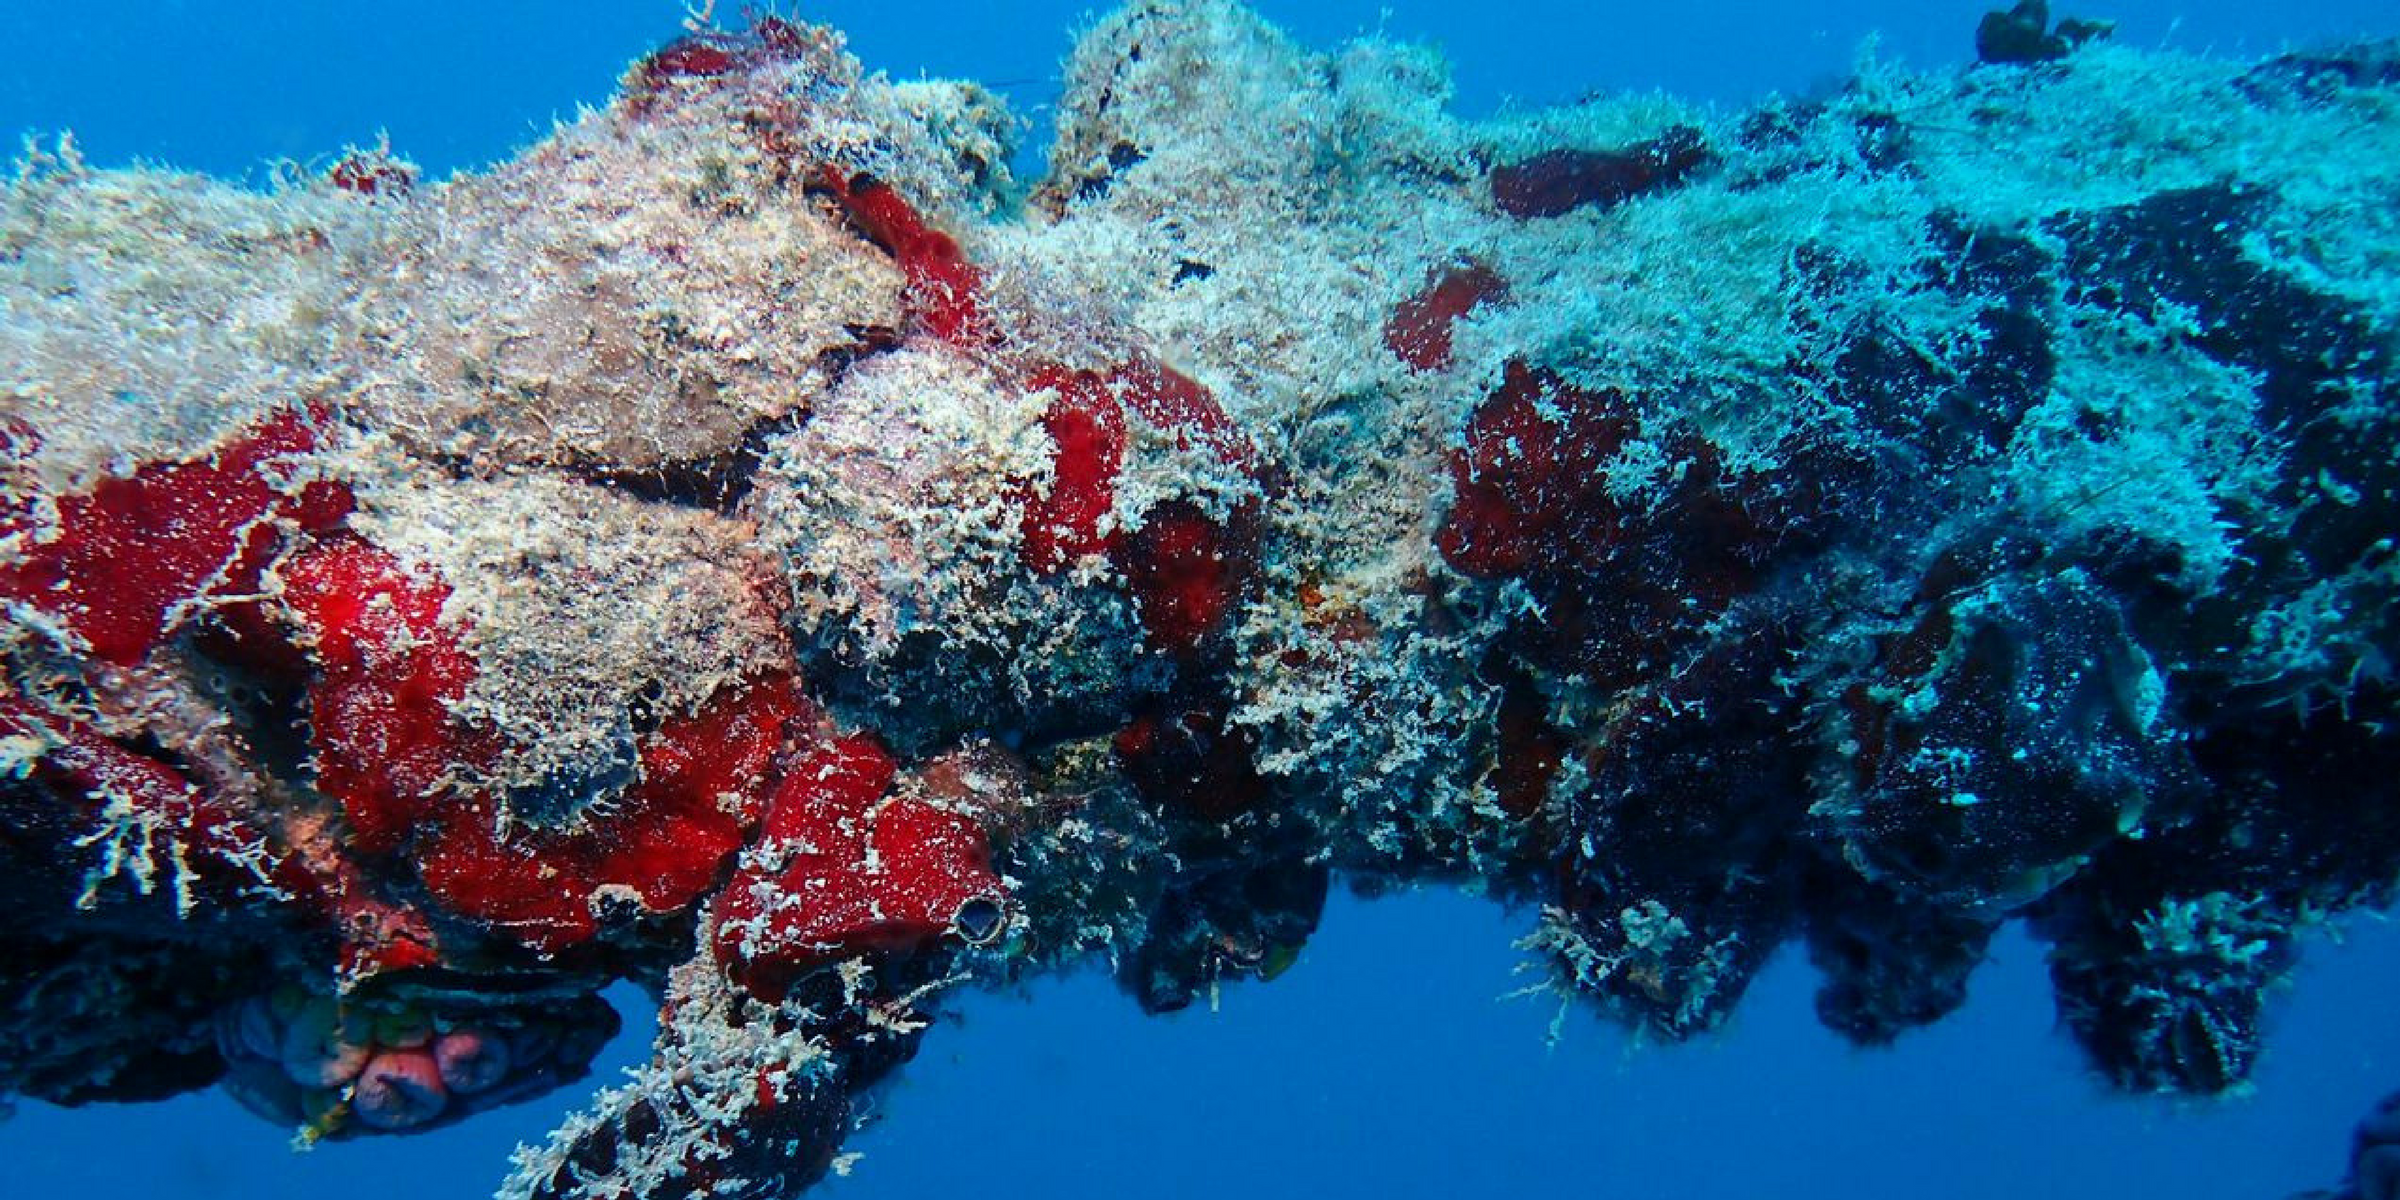 An undersea view of bright red and white coral-like structure